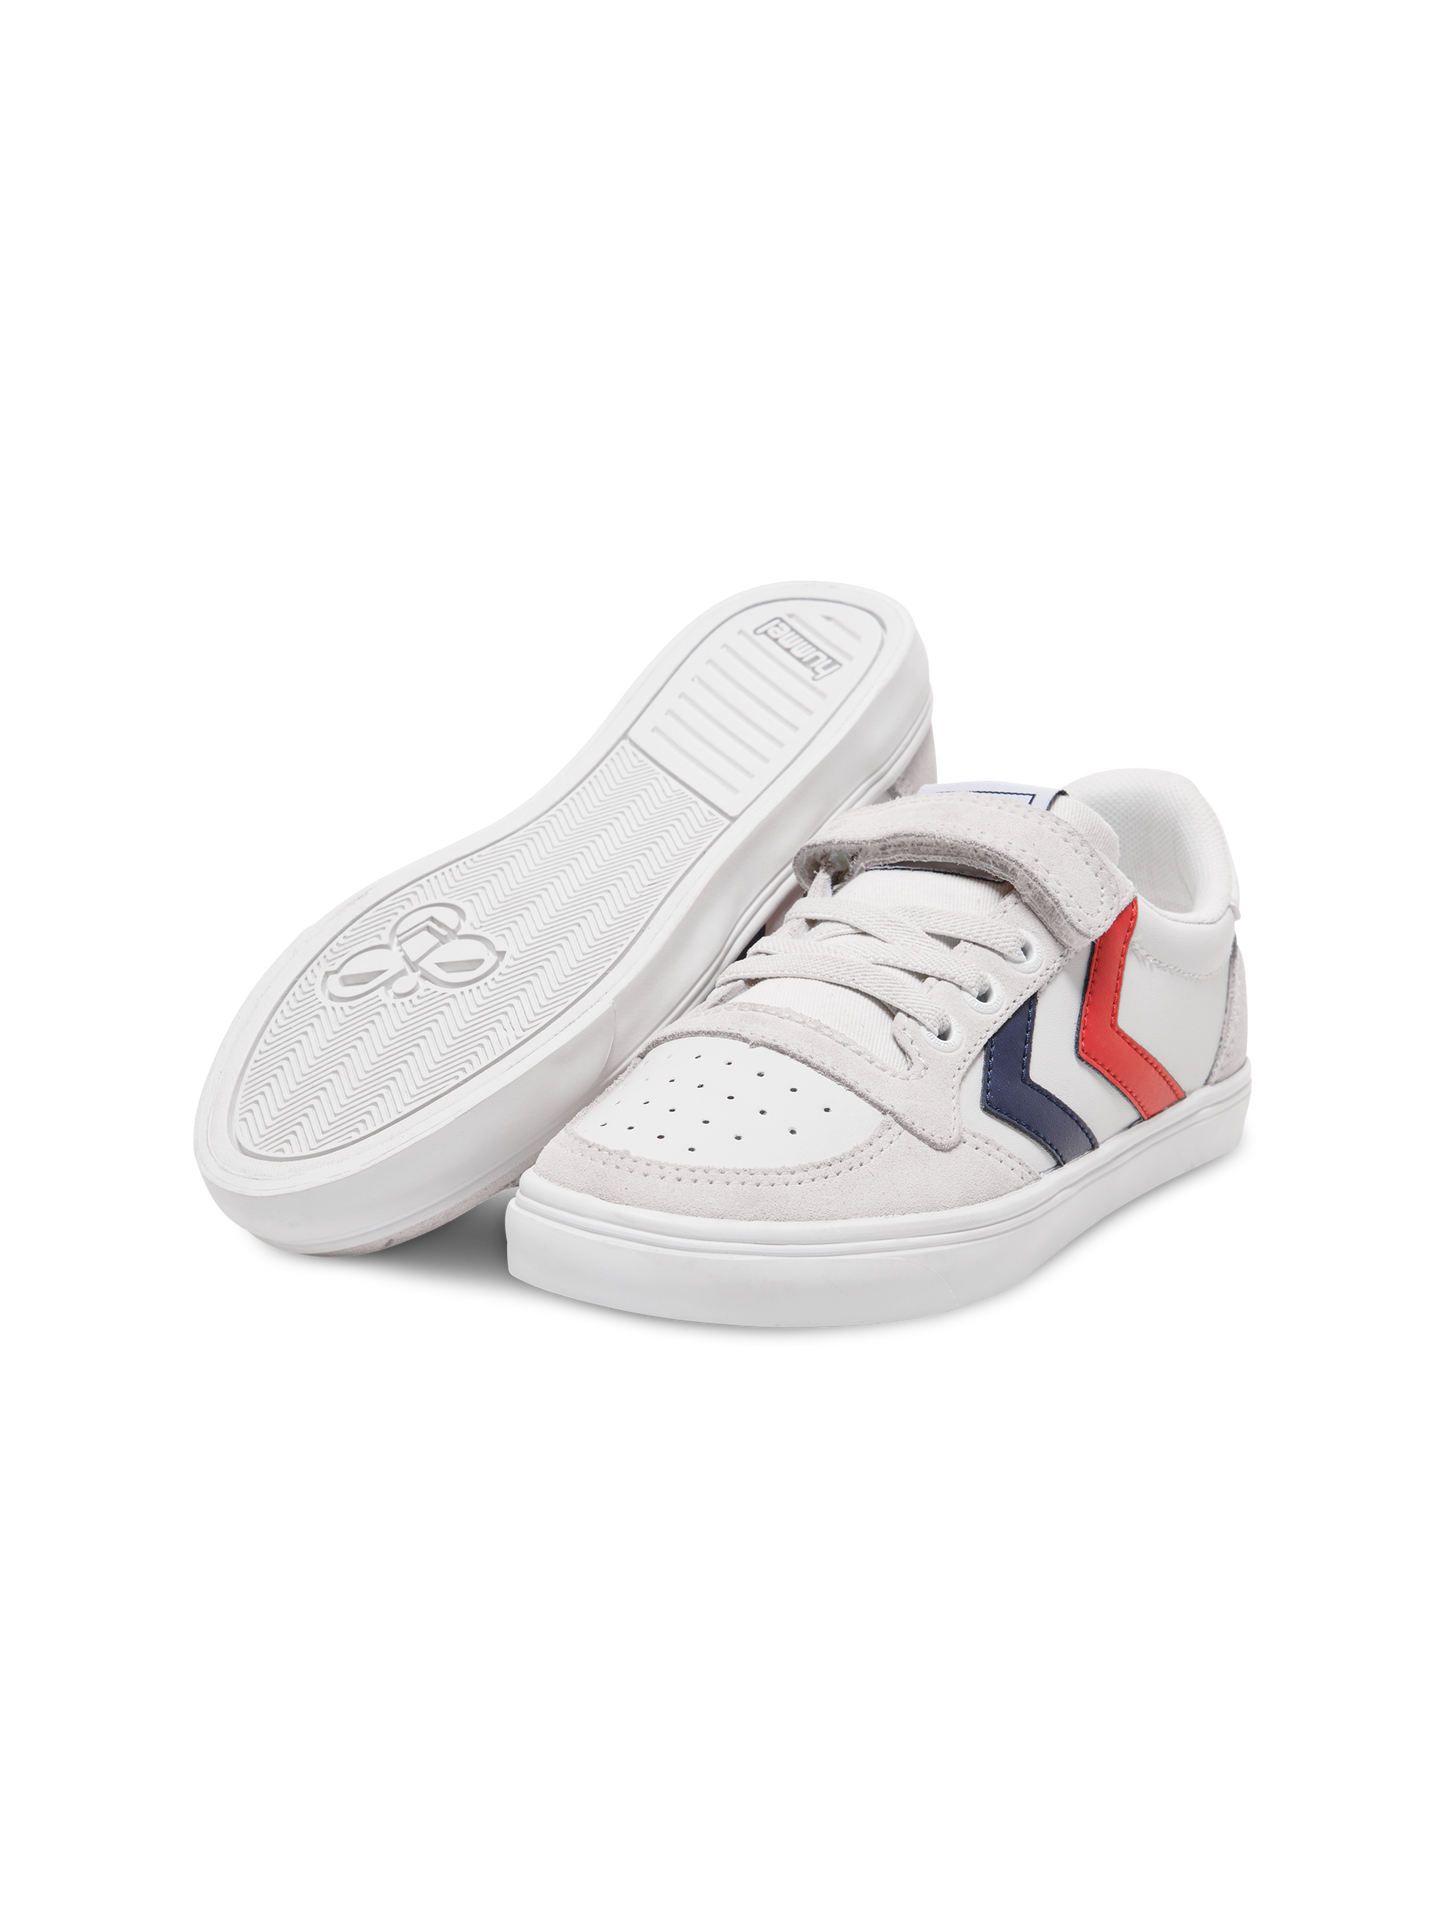 Hummel Slimmer White Stadil Leather low Trainers